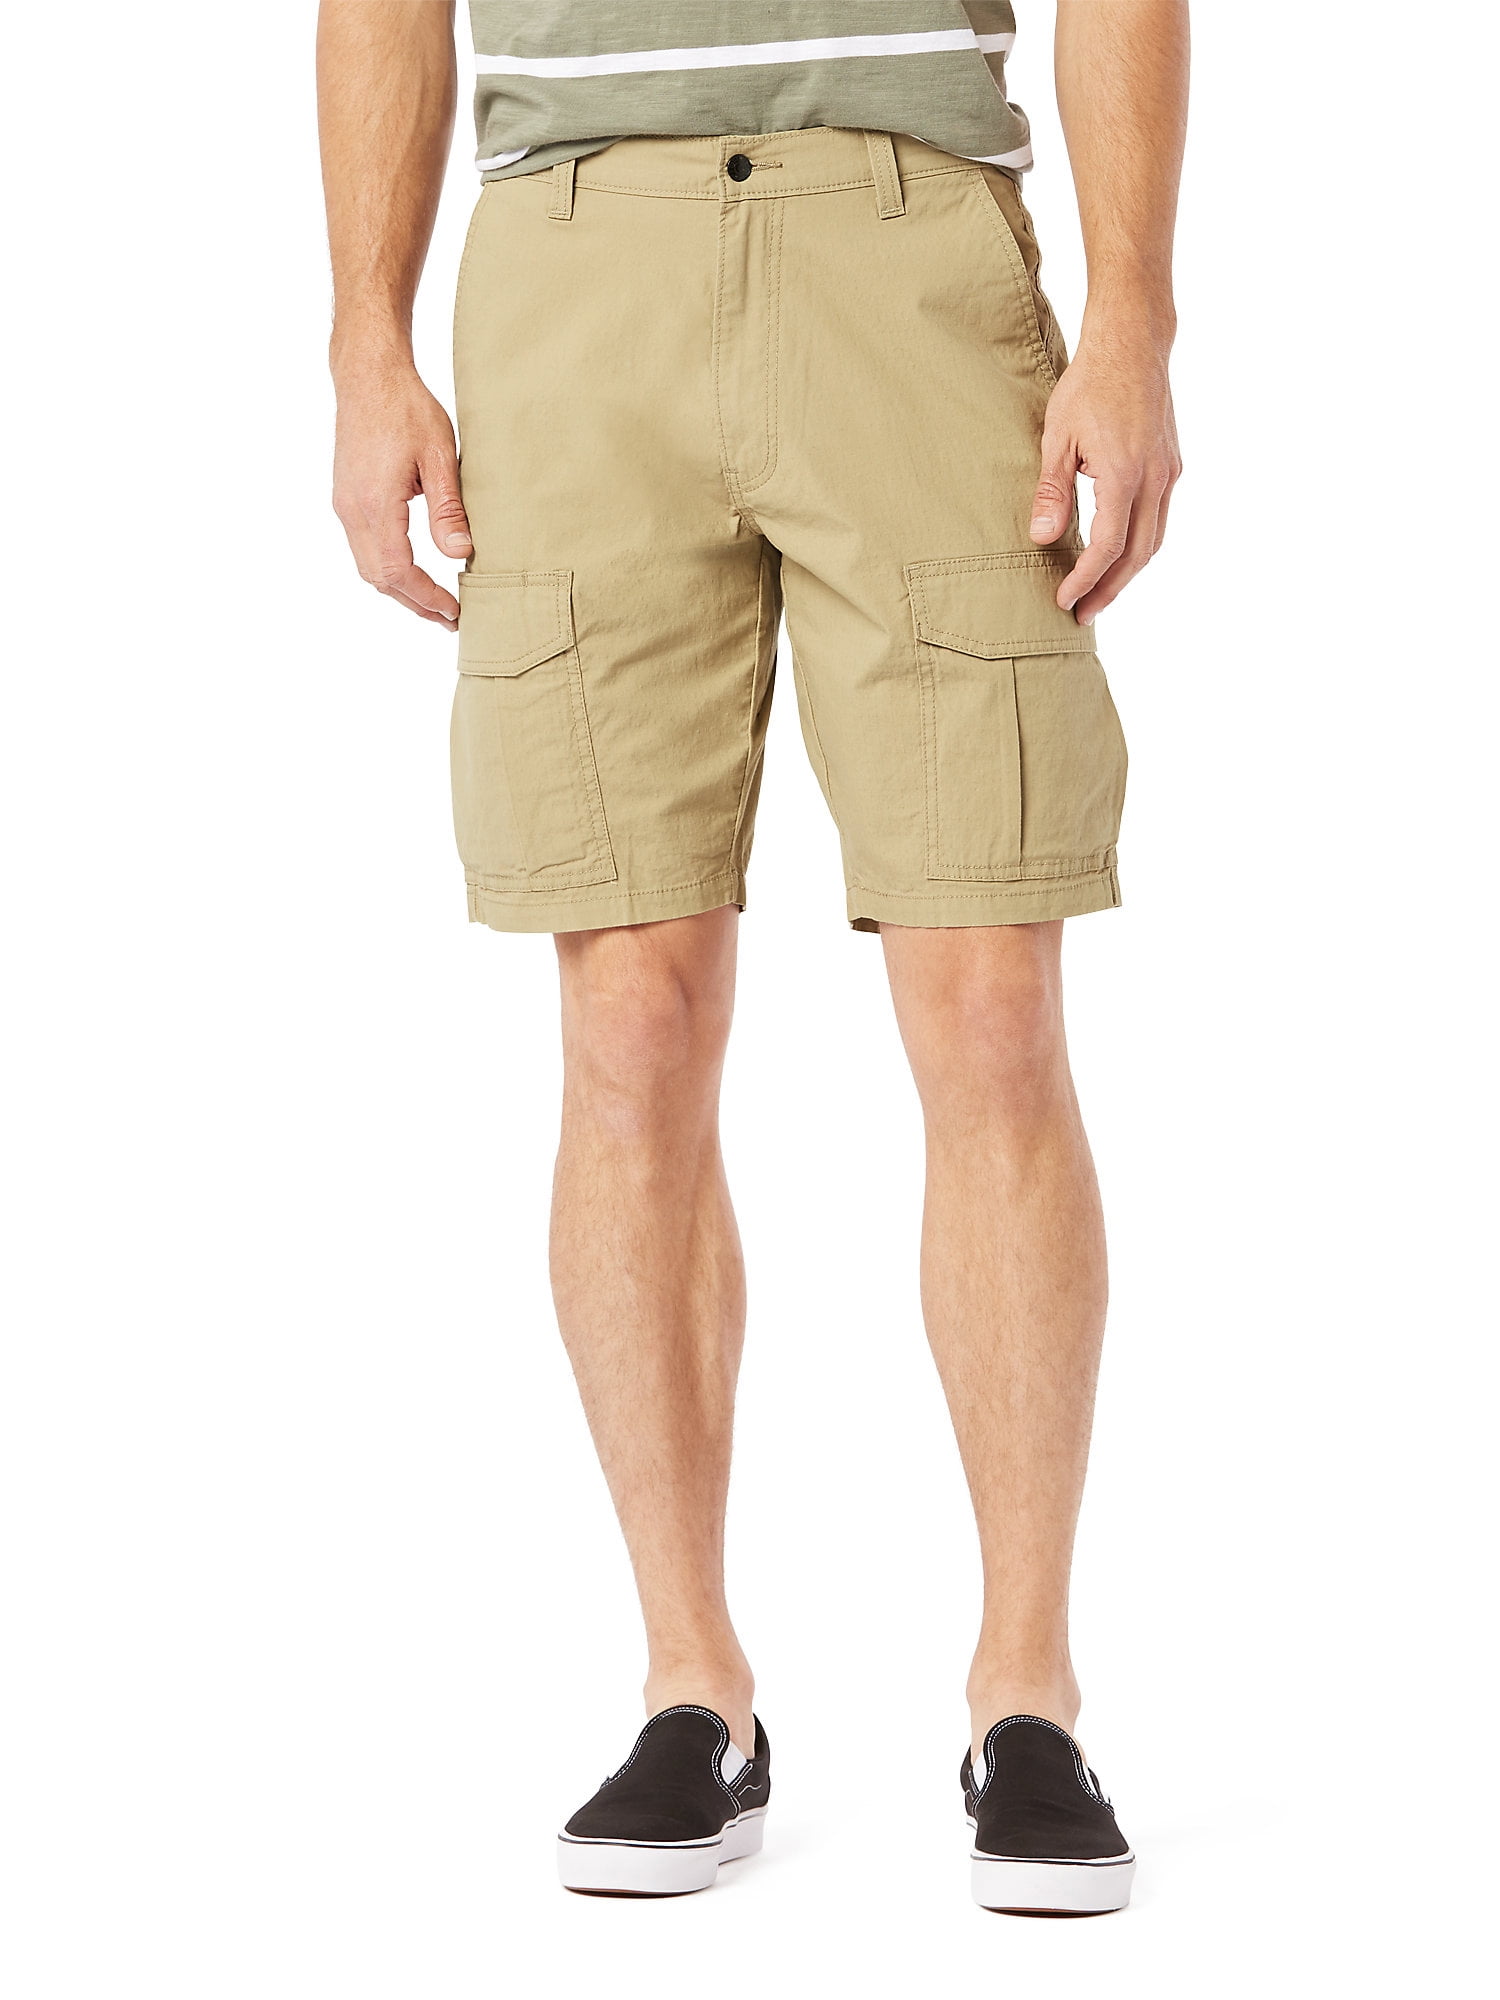 Signature by Levi Strauss & Co. Men's Utility Comfort Short 